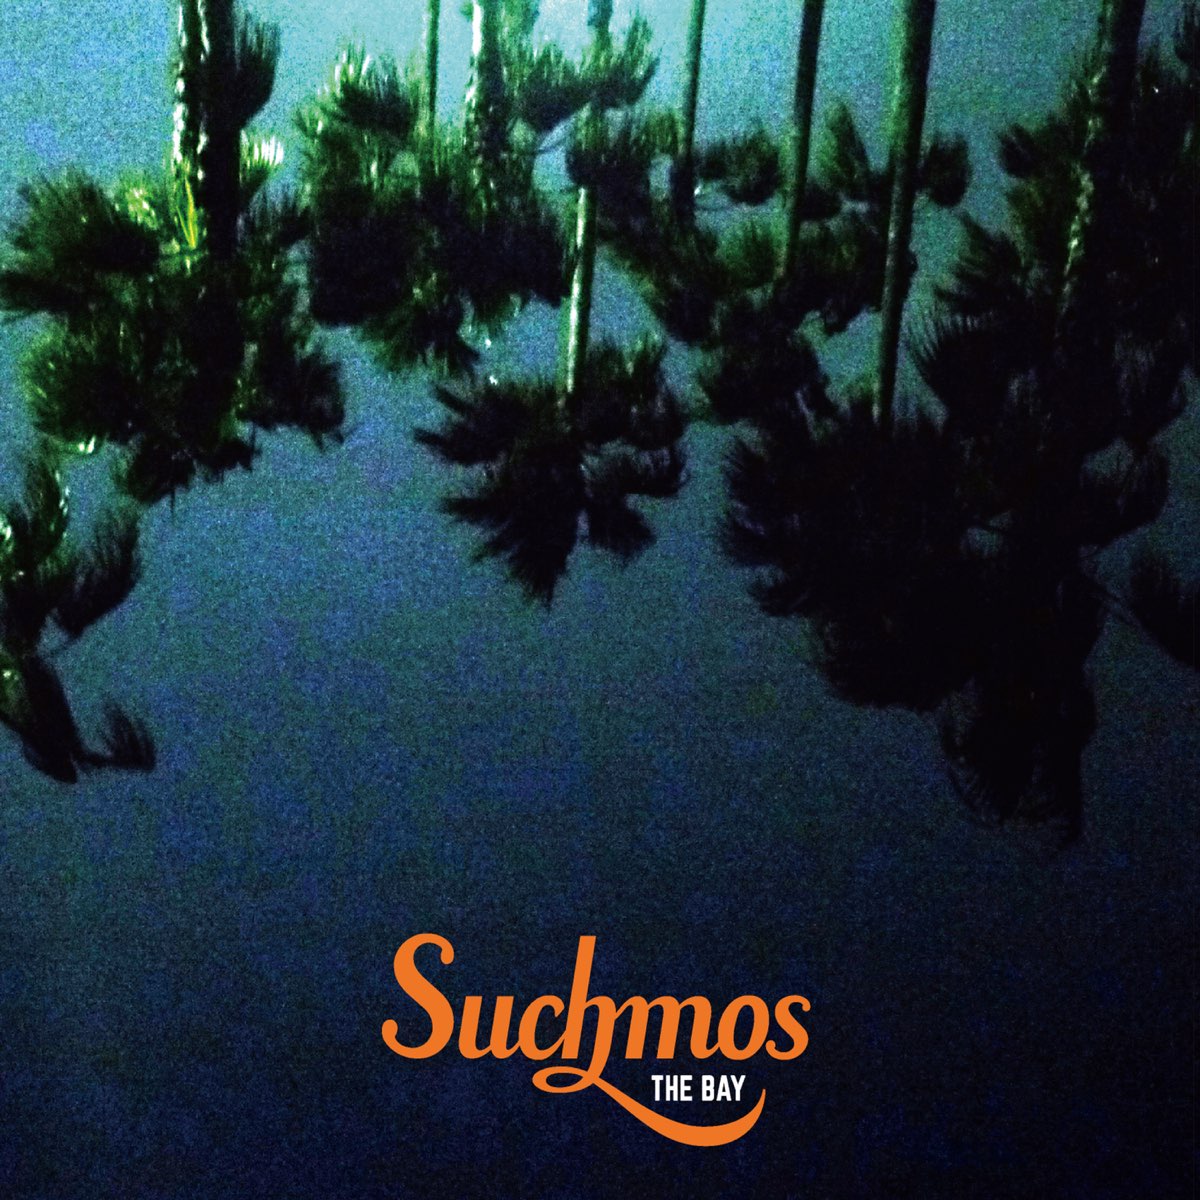 The Bay by Suchmos on Apple Music